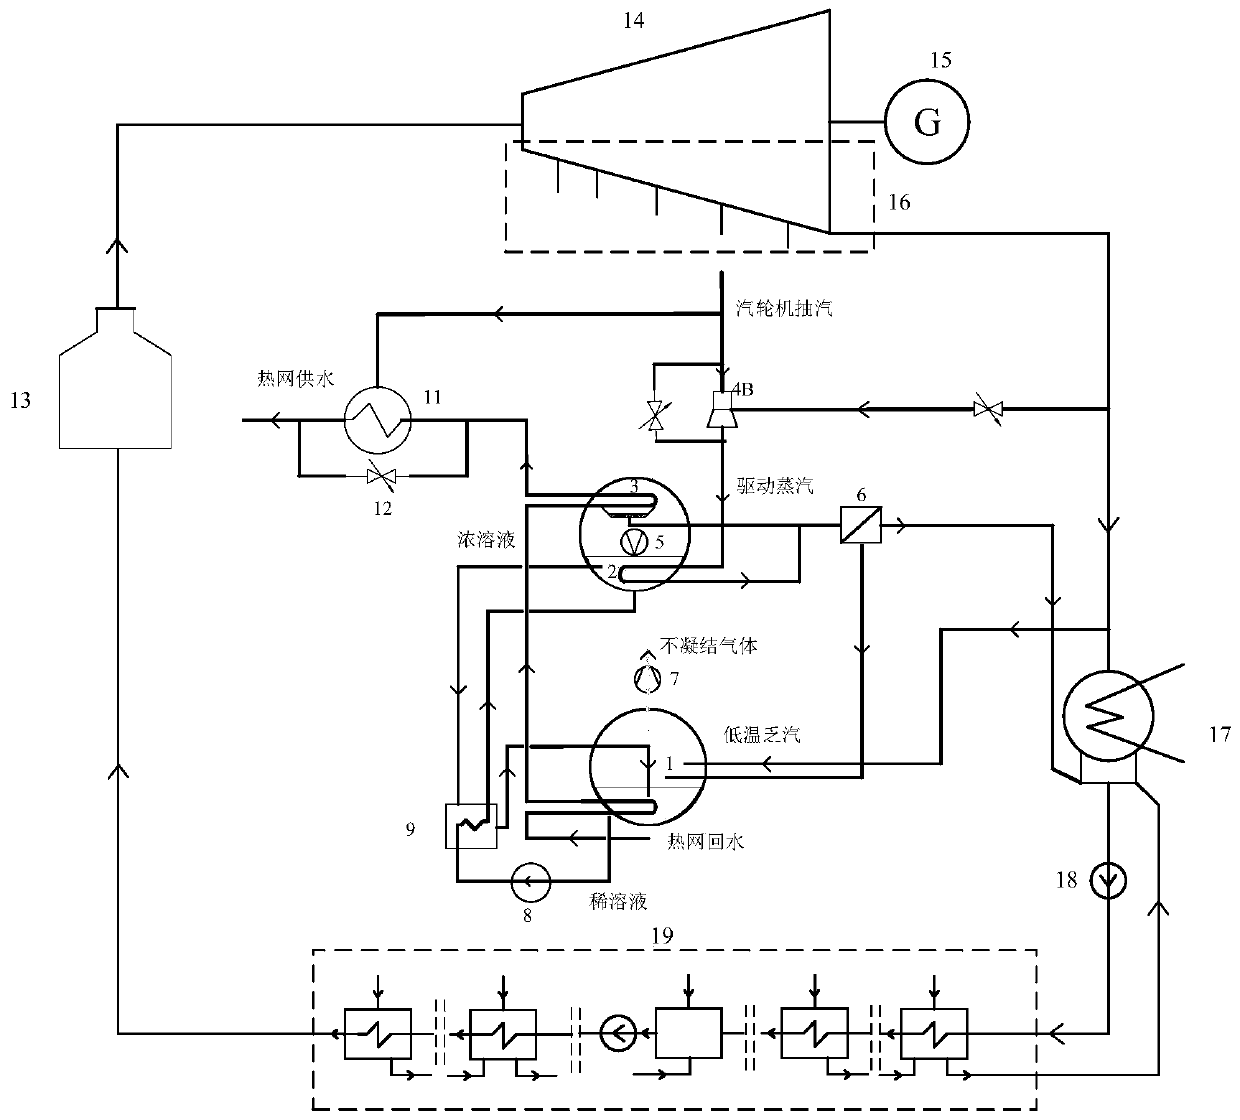 A heat pump heating system with deep exhaust steam waste heat recovery